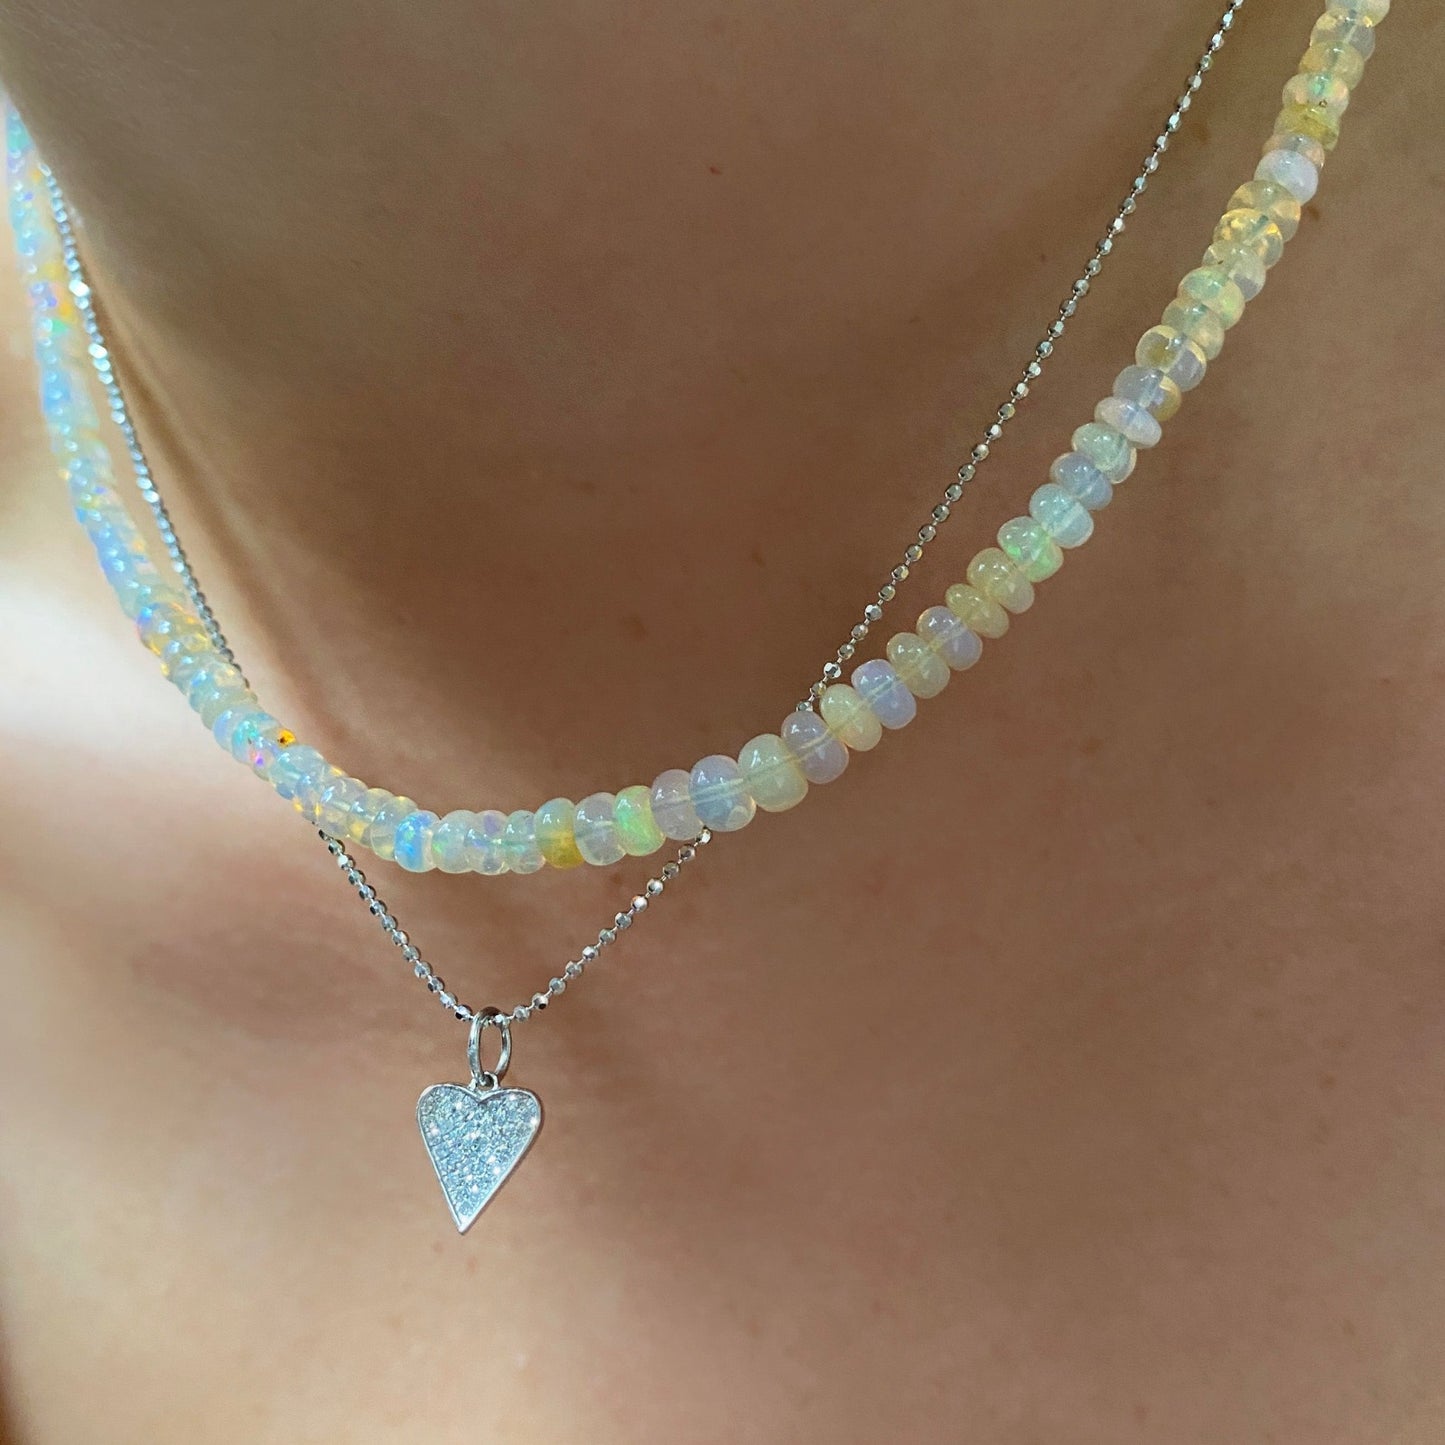 Shimmering beaded necklace made of smooth opal rondels in shades of clear natural opals on a slim gold lobster clasp. Styled on a neck layered with a diamond cut bead chain necklace and medium pave heart charm. 